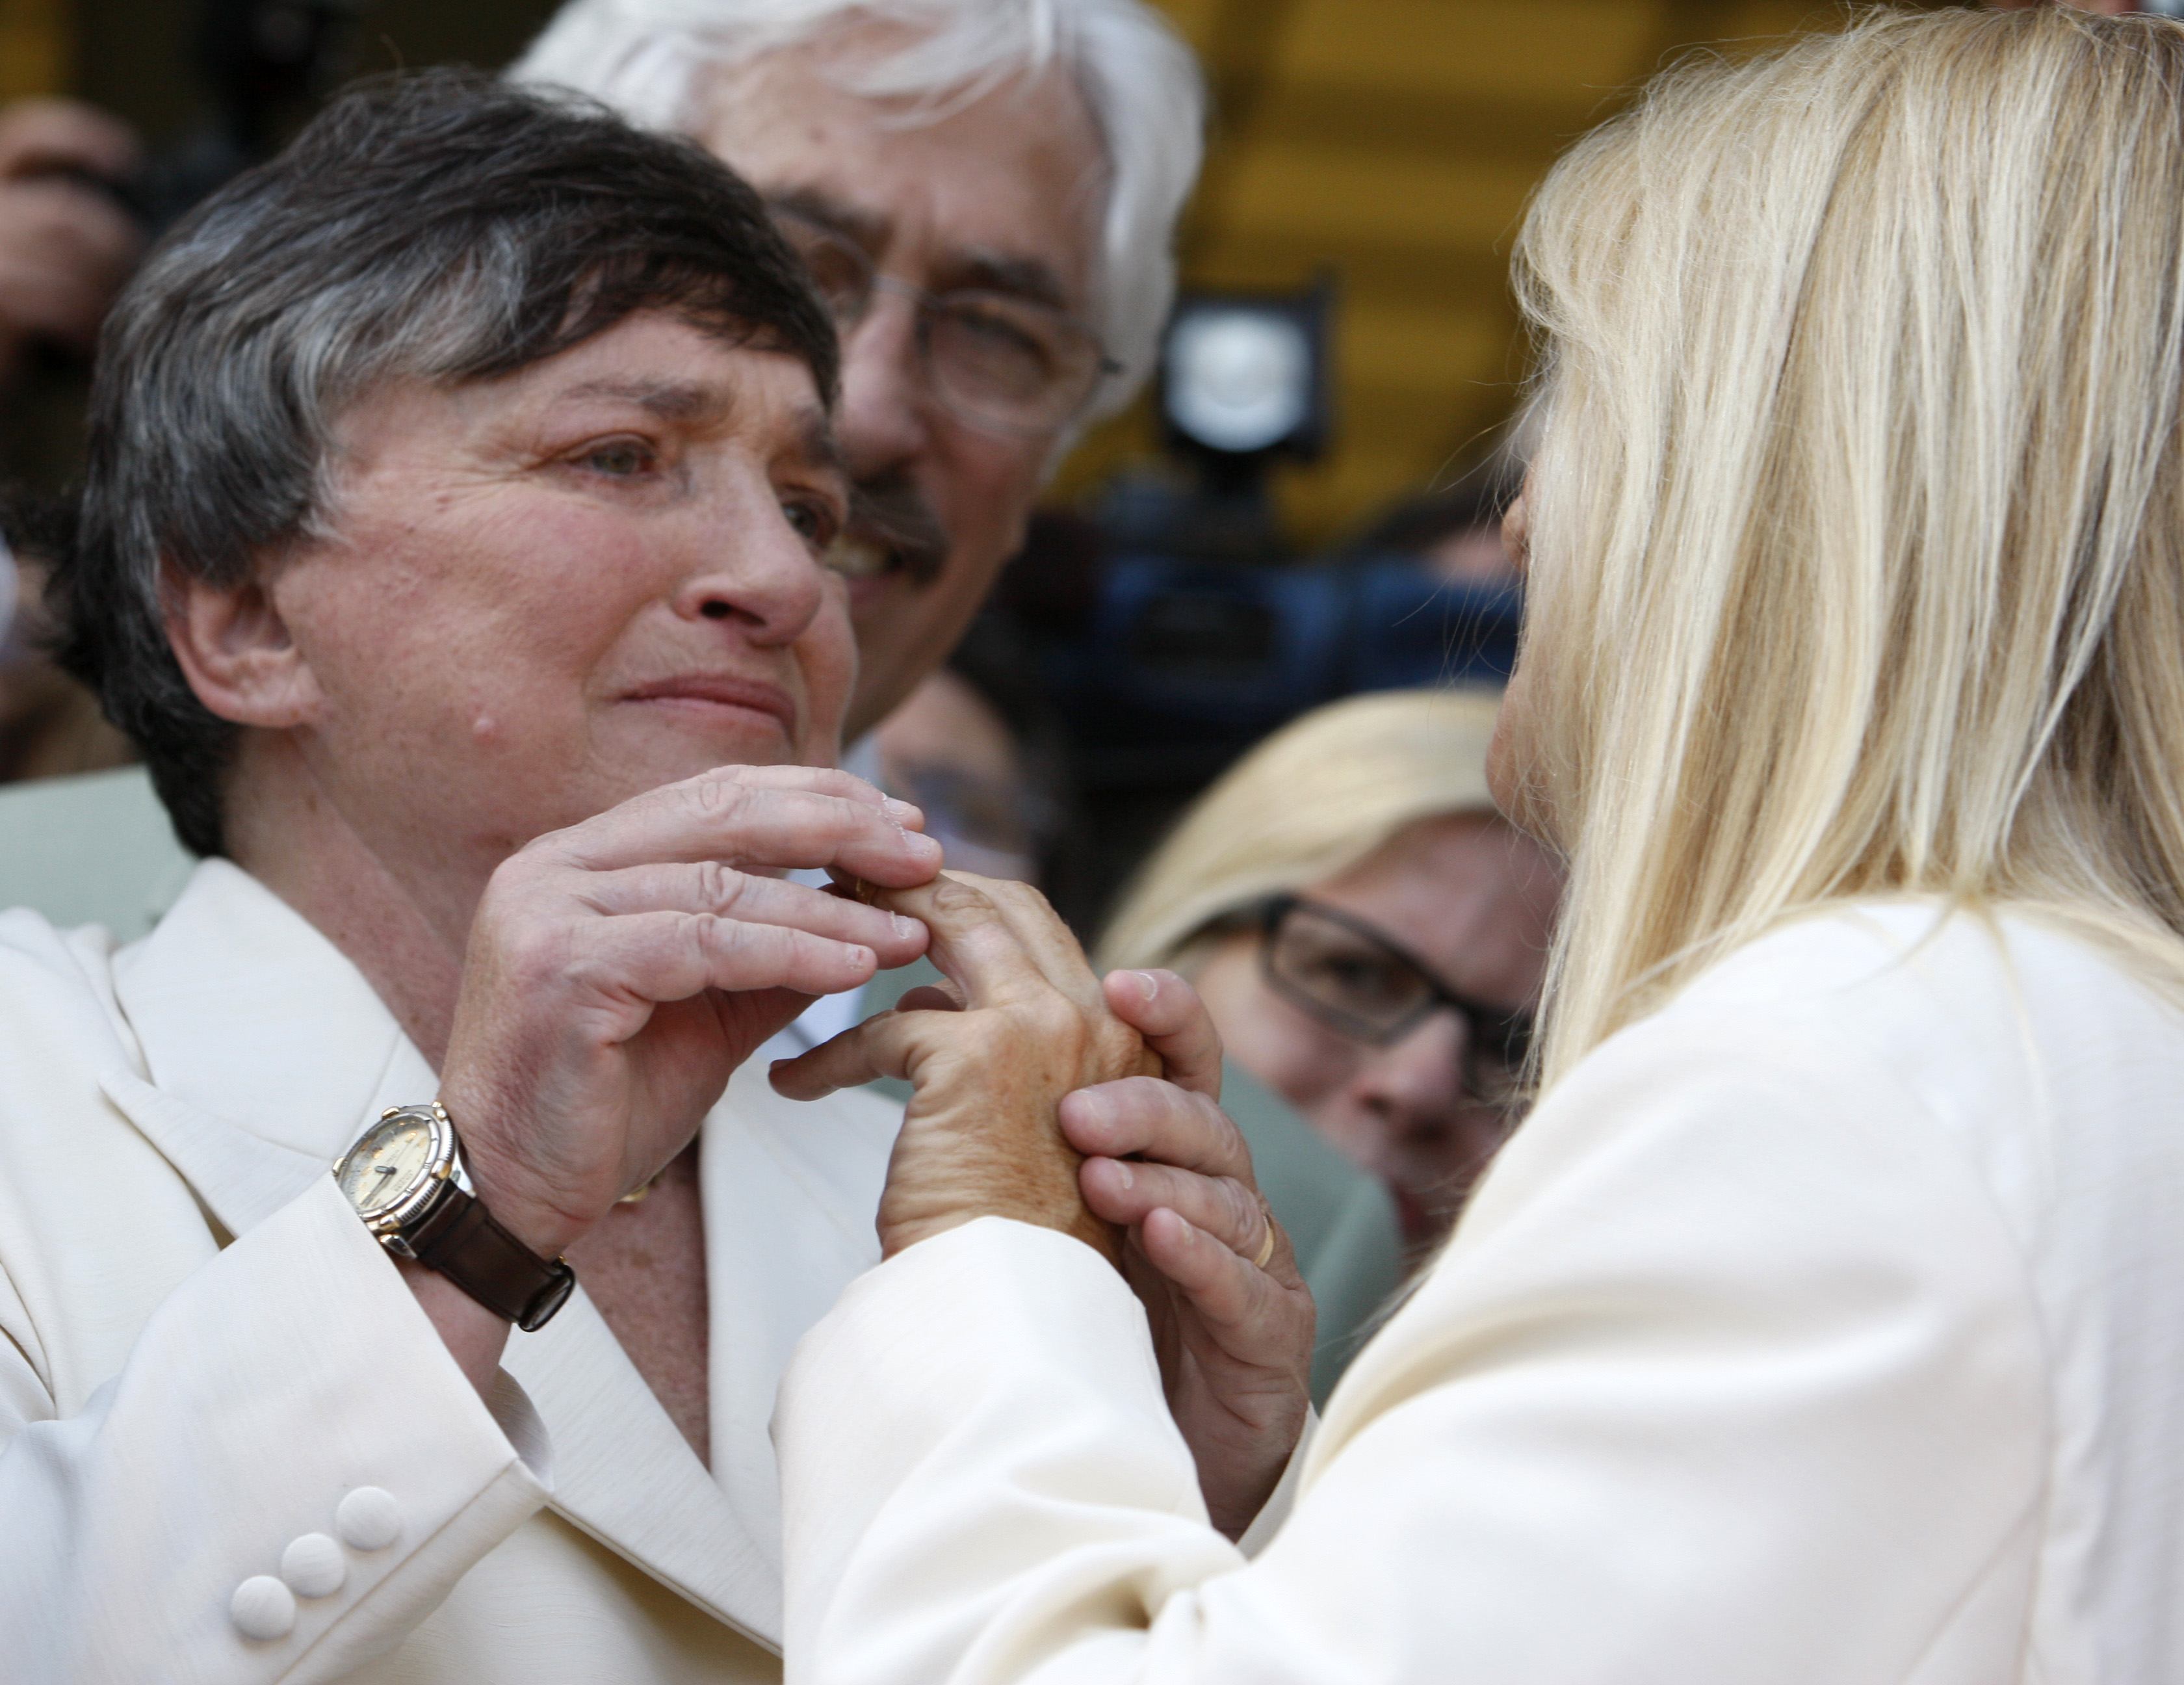 Gay couples wed in Calif.